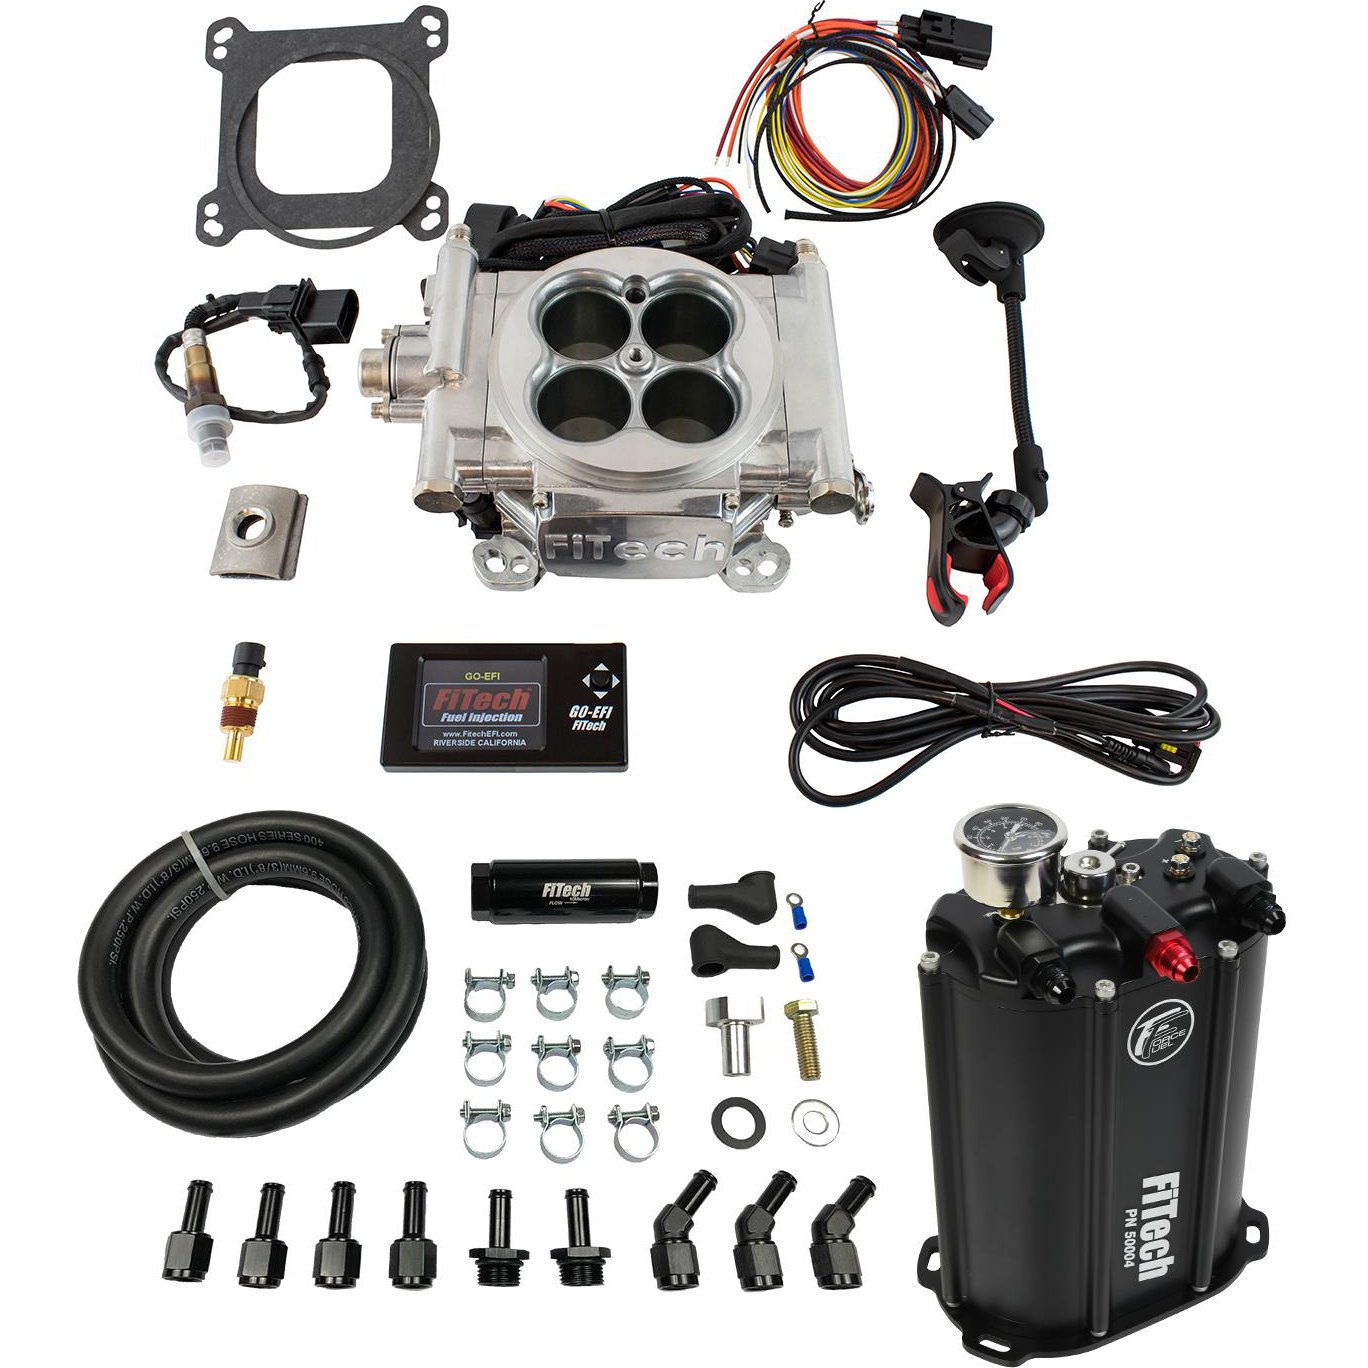 35201 Go EFI-4 600 HP Throttle Body System Master Kit with Force Fuel System